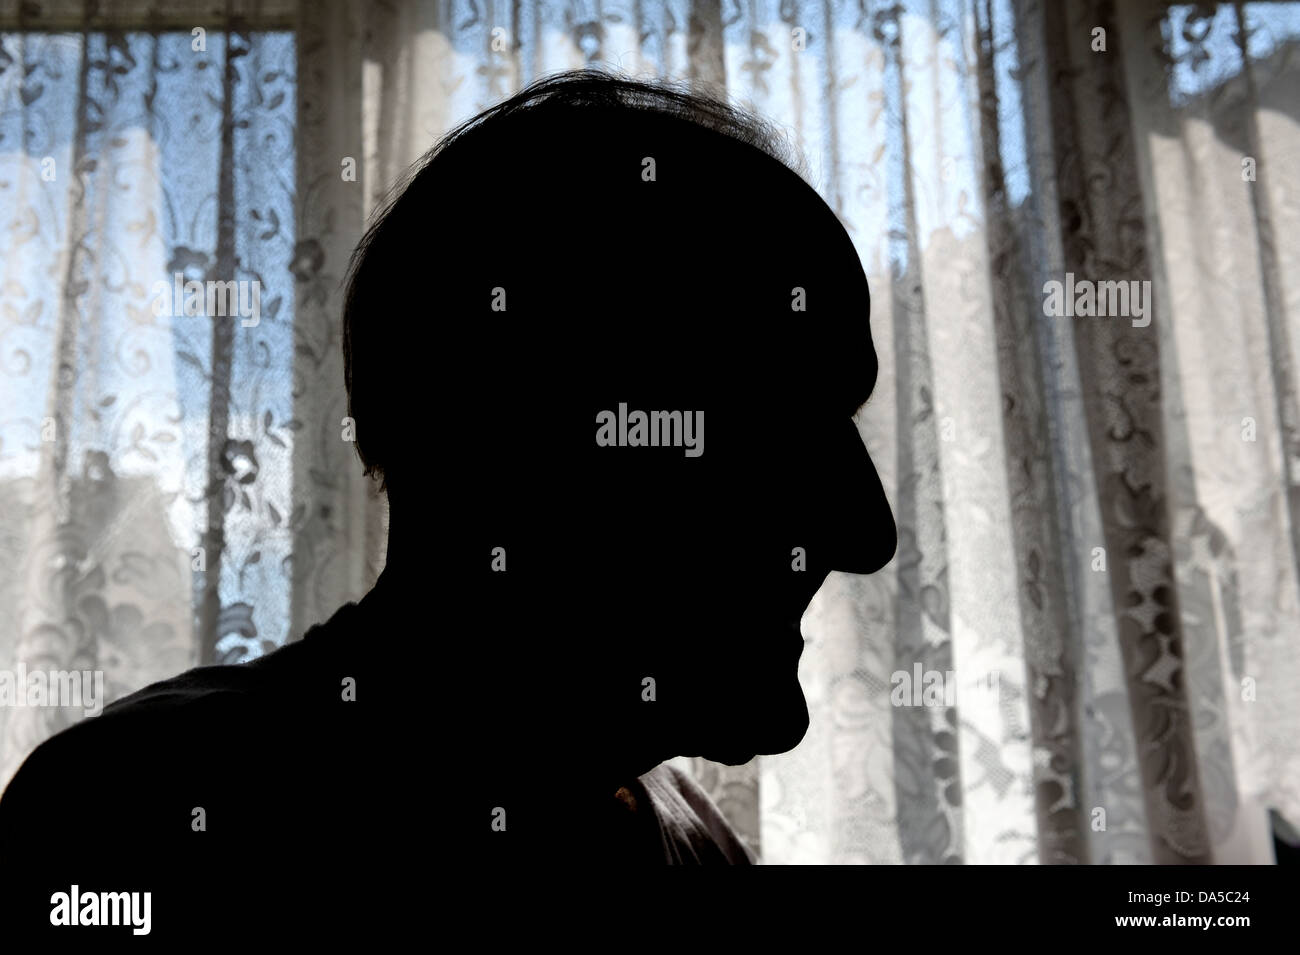 silhouette of an old man standing in front of net curtains Stock Photo